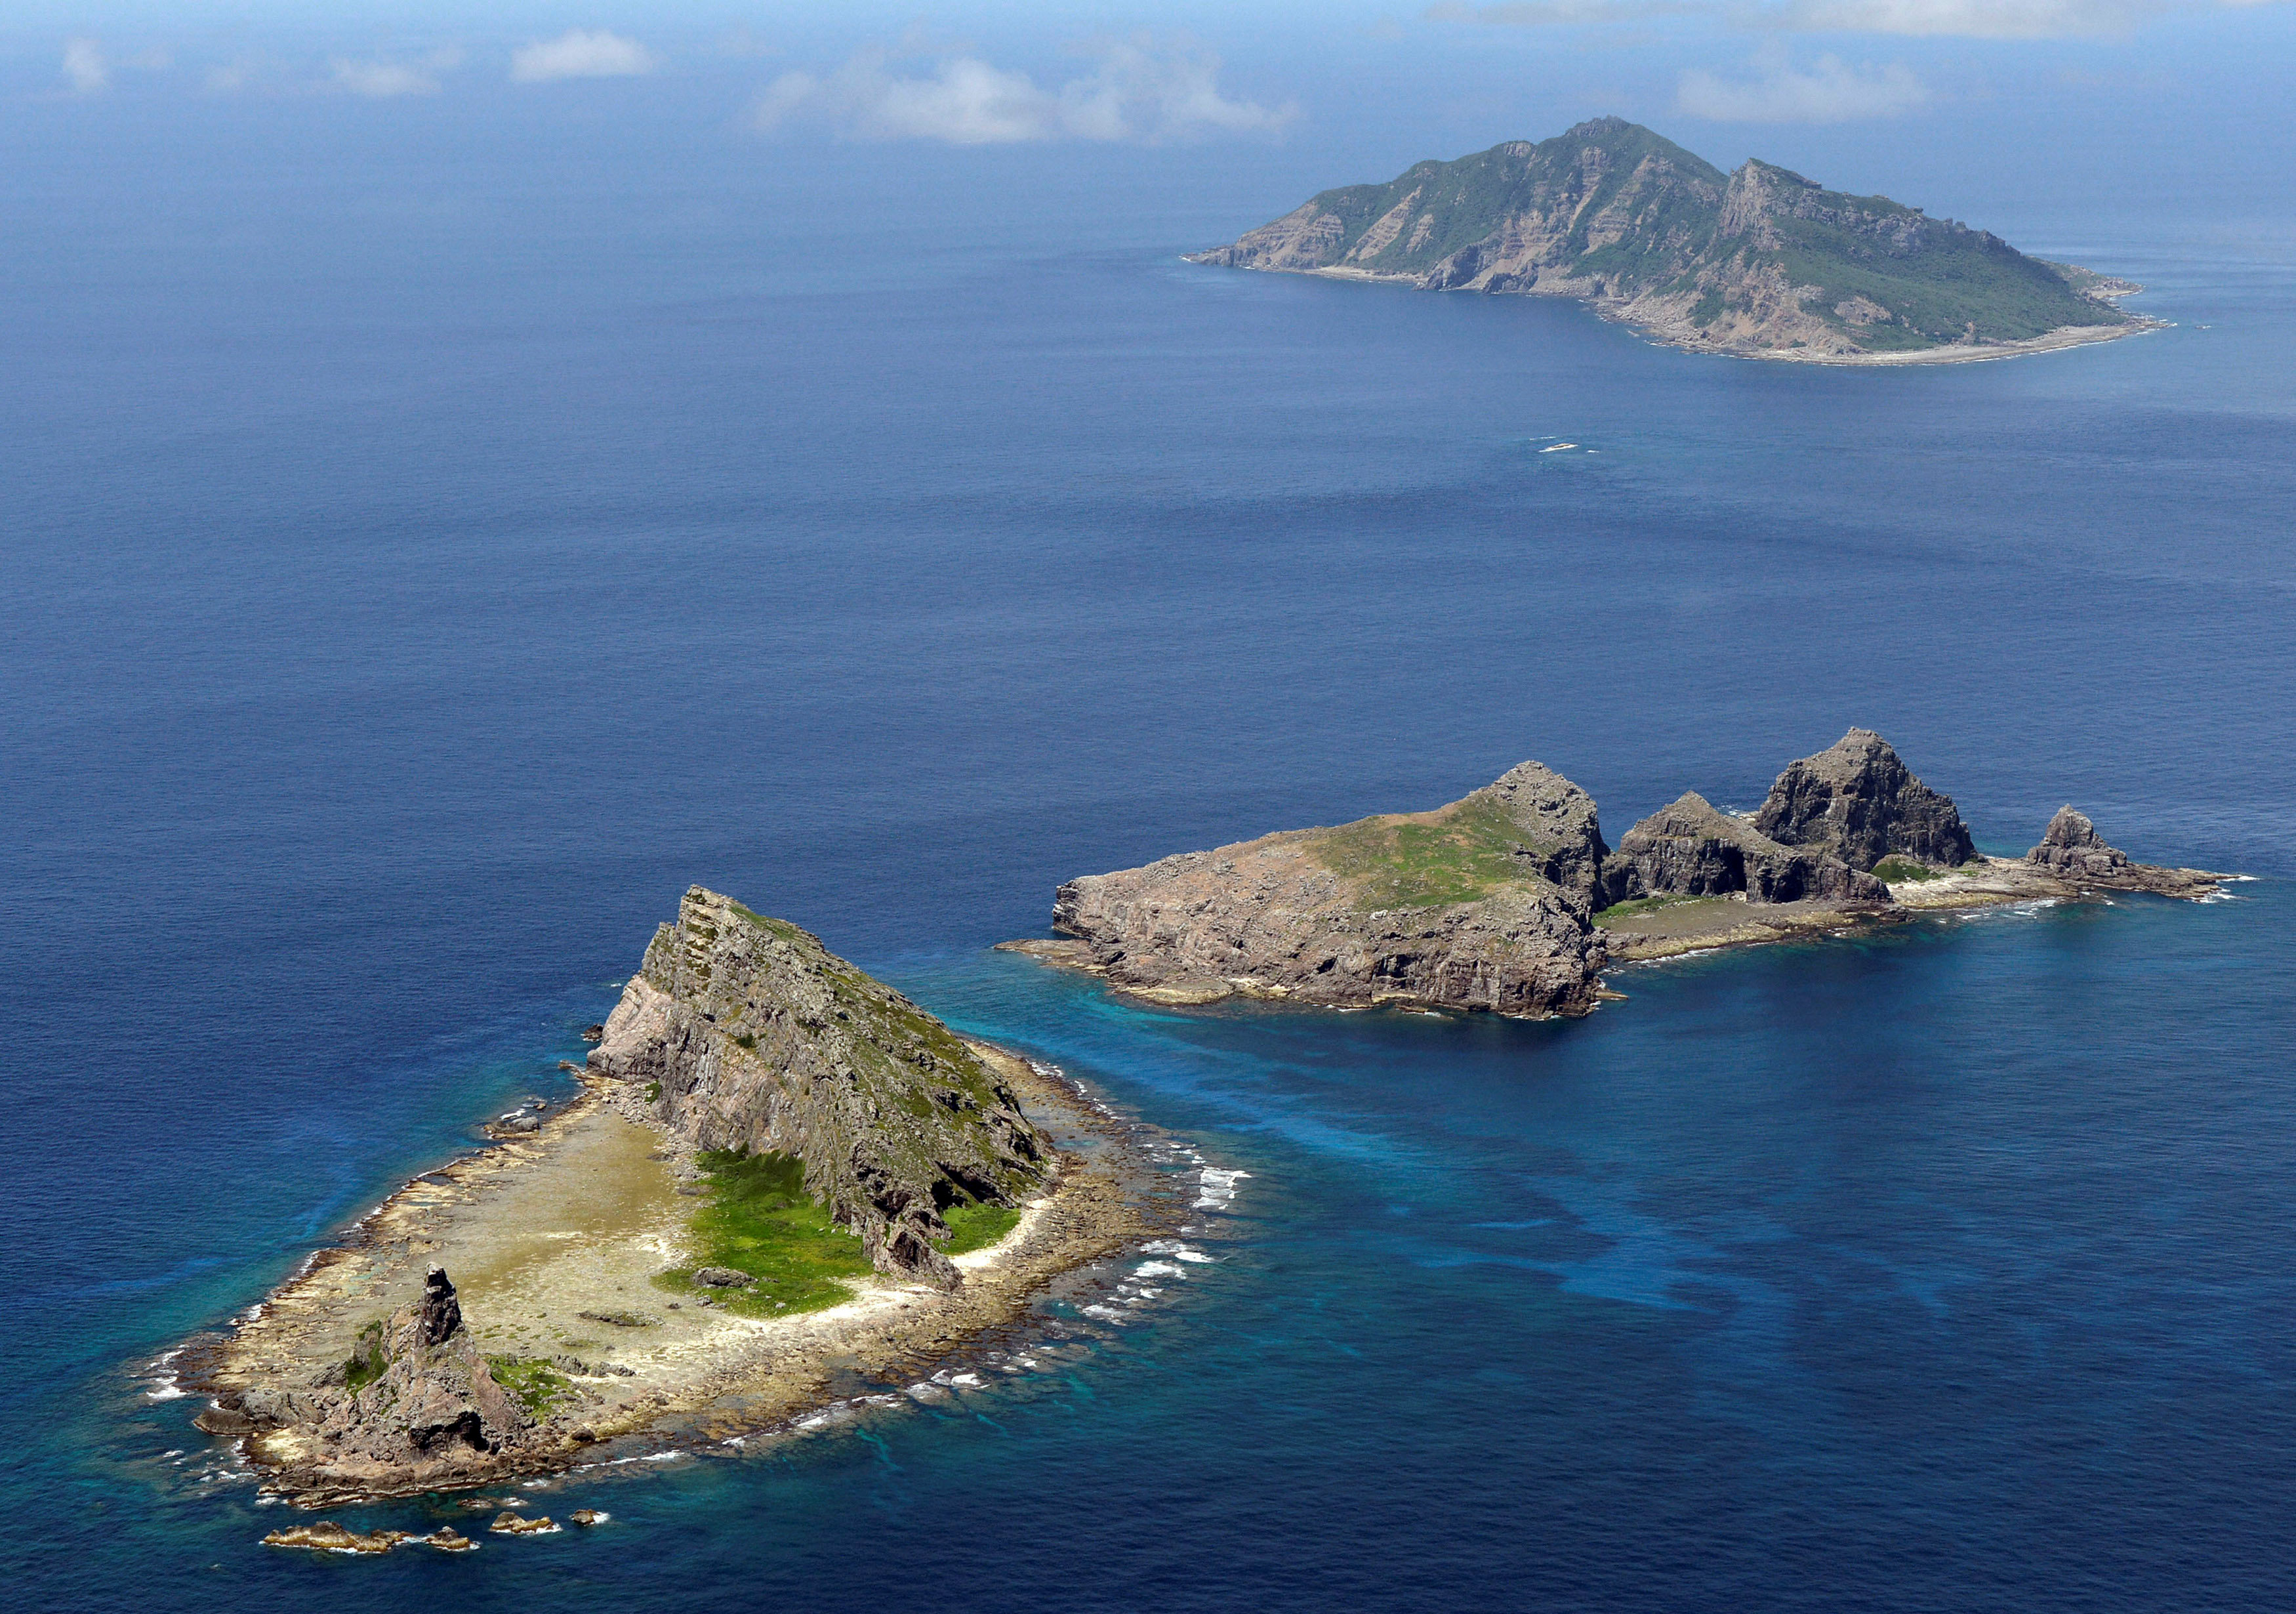 Japan protests after Chinese warship sails near disputed East China Sea islands